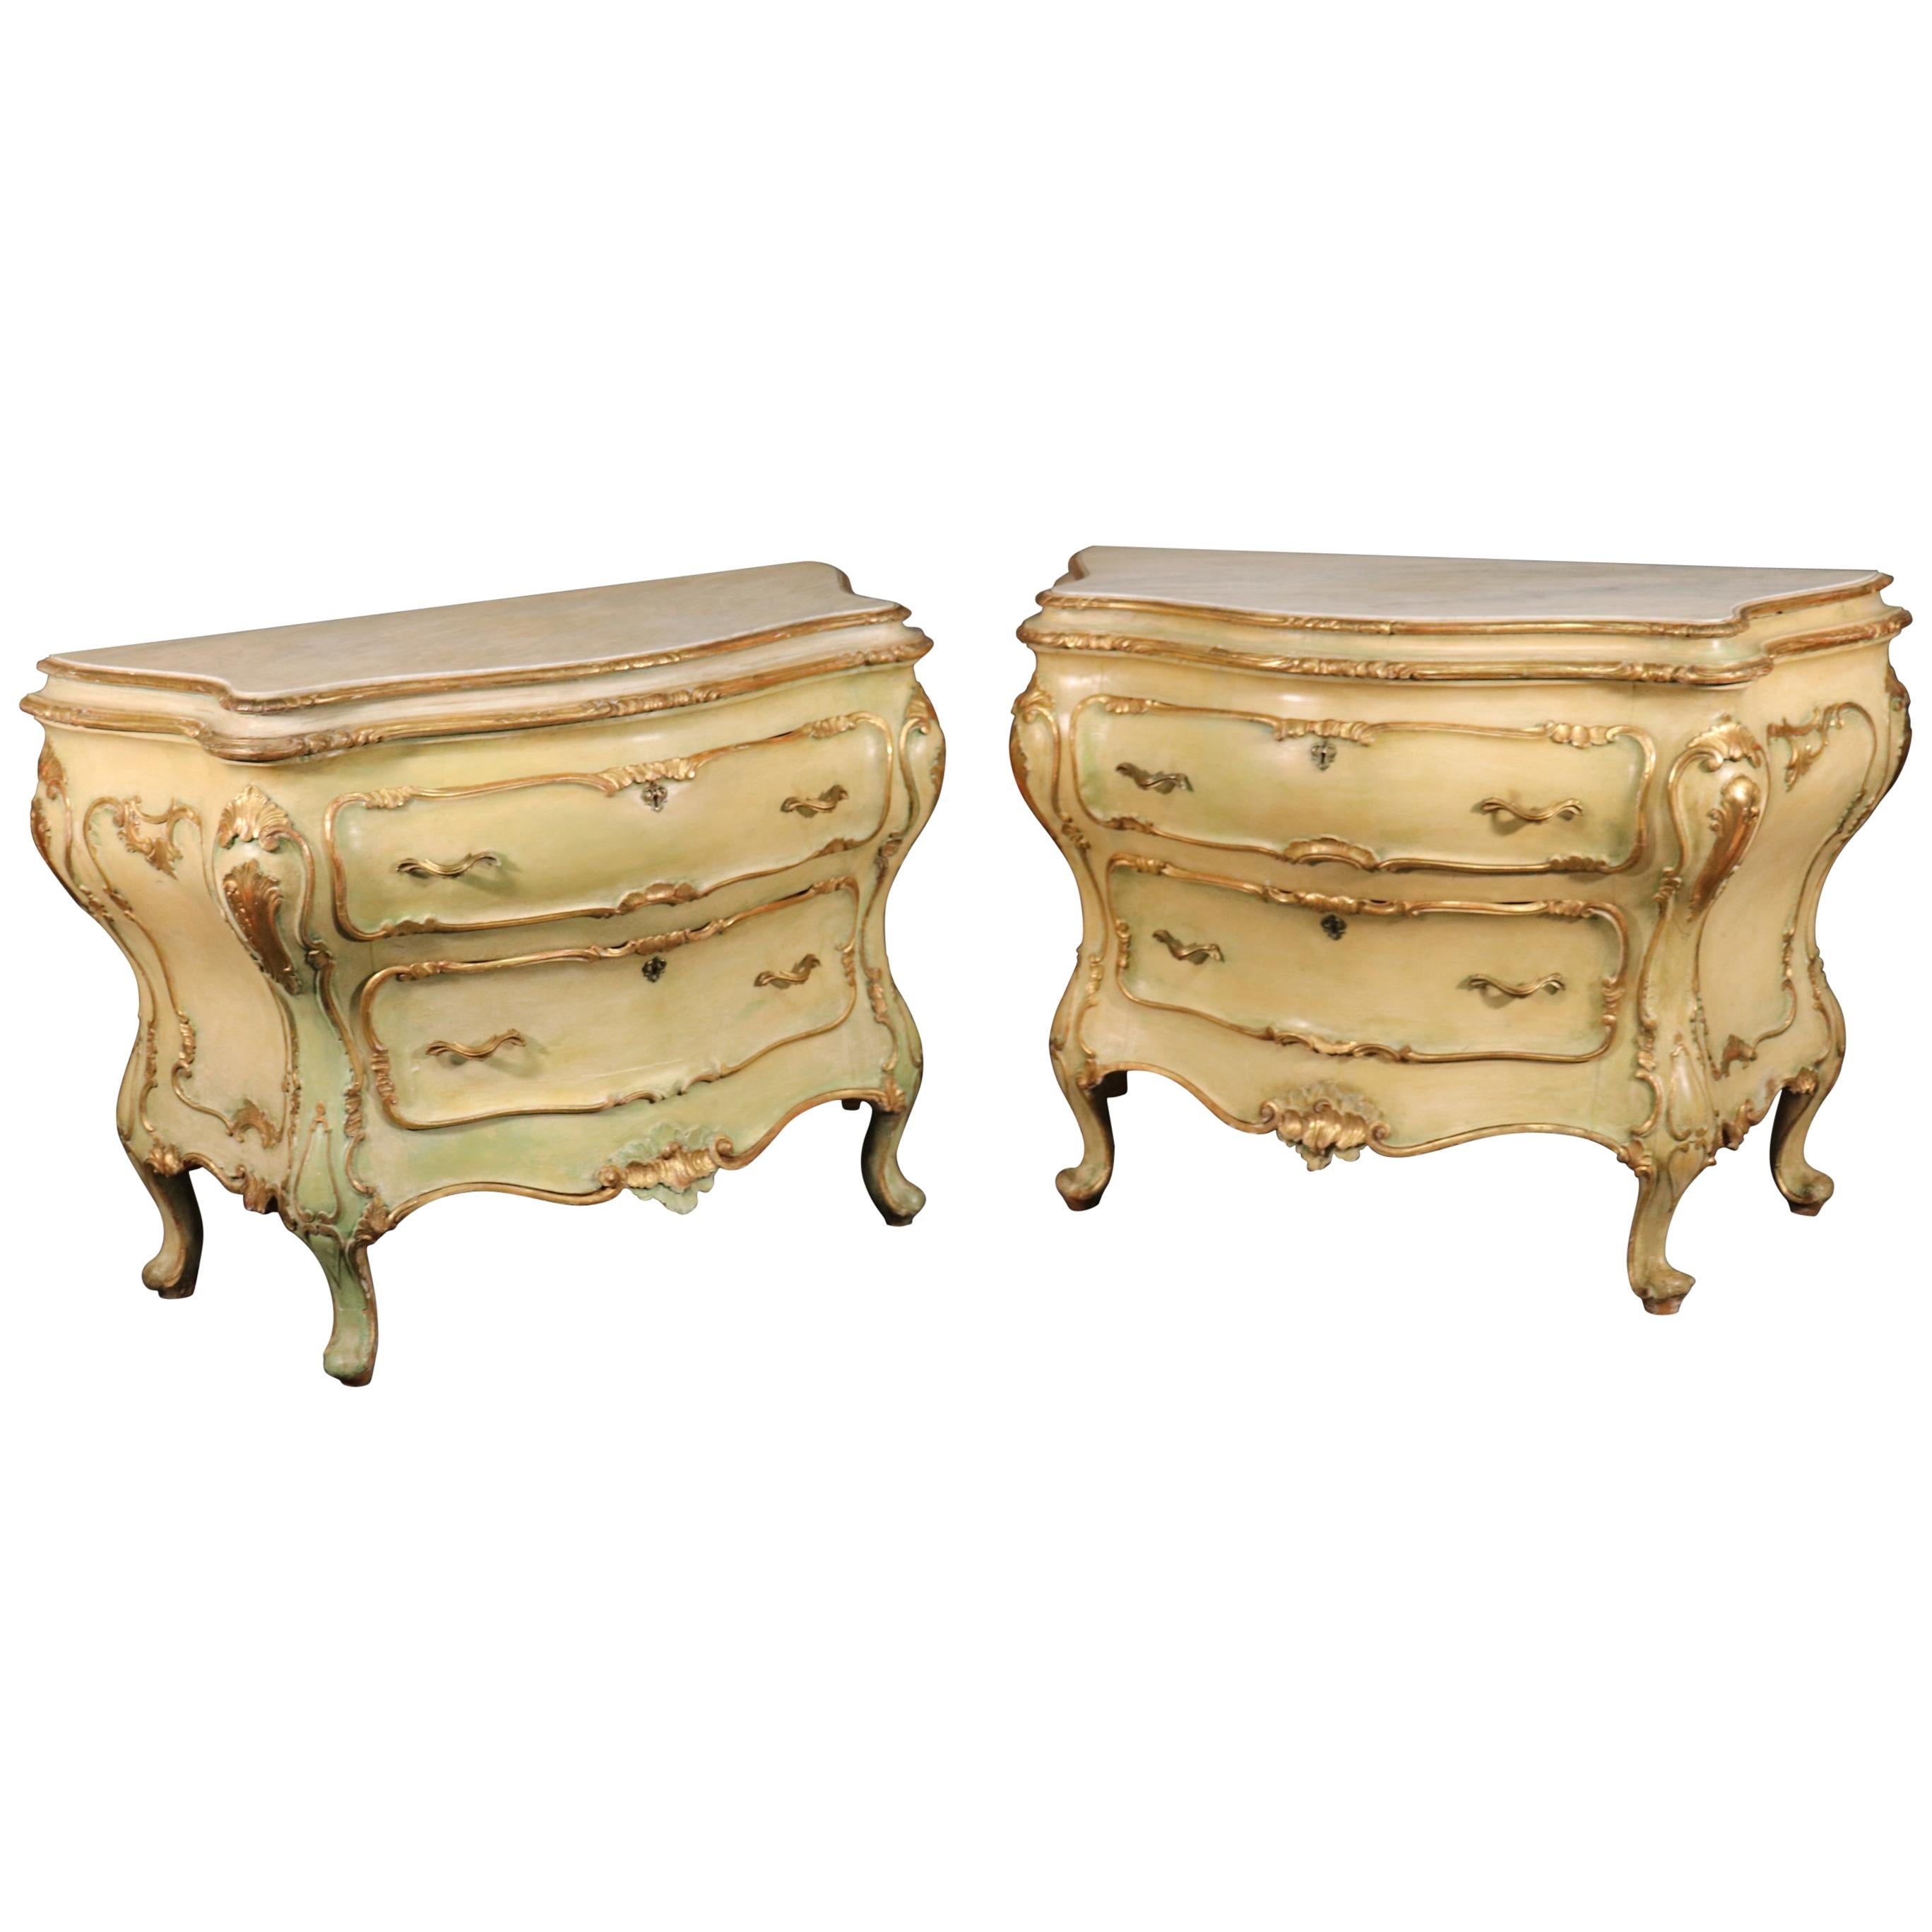 Pair Fine Large Italian Painted Marble Top Rococo Commodes Dressers 1930s Era